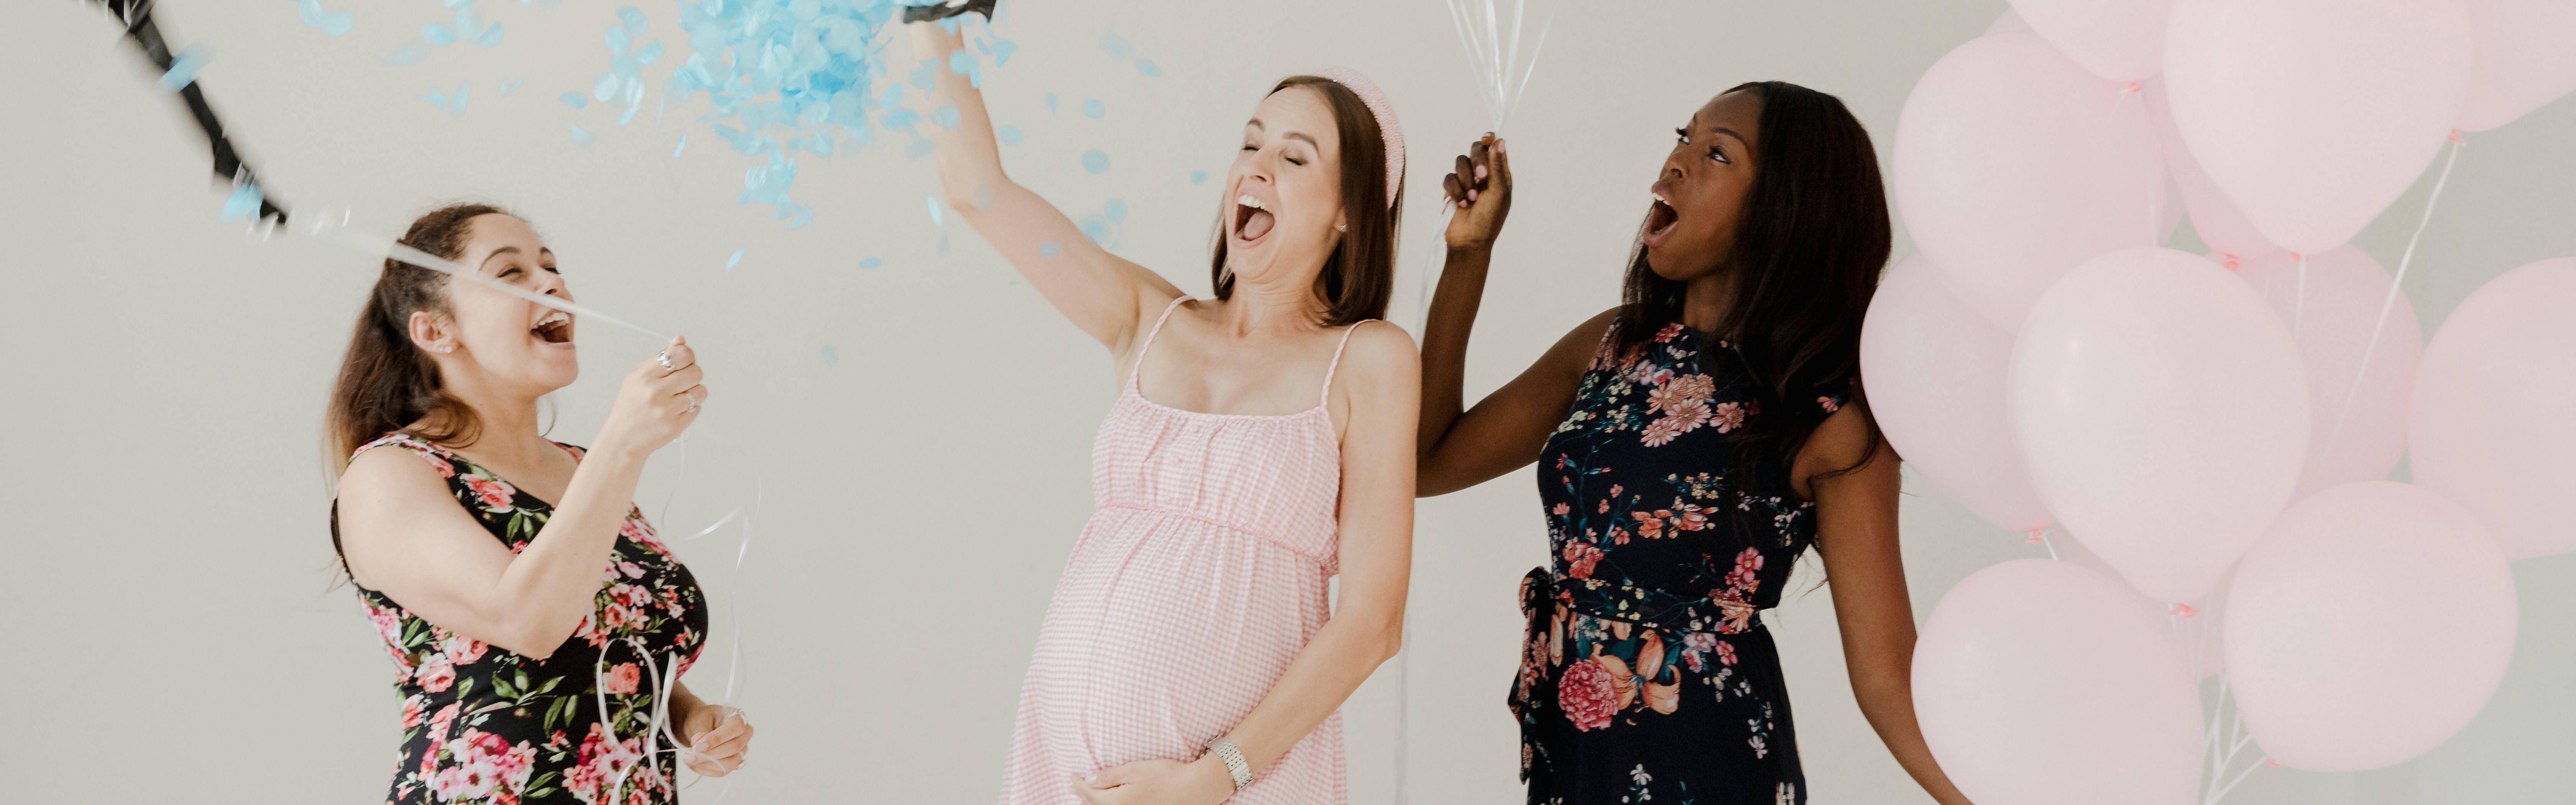 Three women excitedly laughing. There is confetti and one of the woman is holding balloons. One of the women is pregnant. 